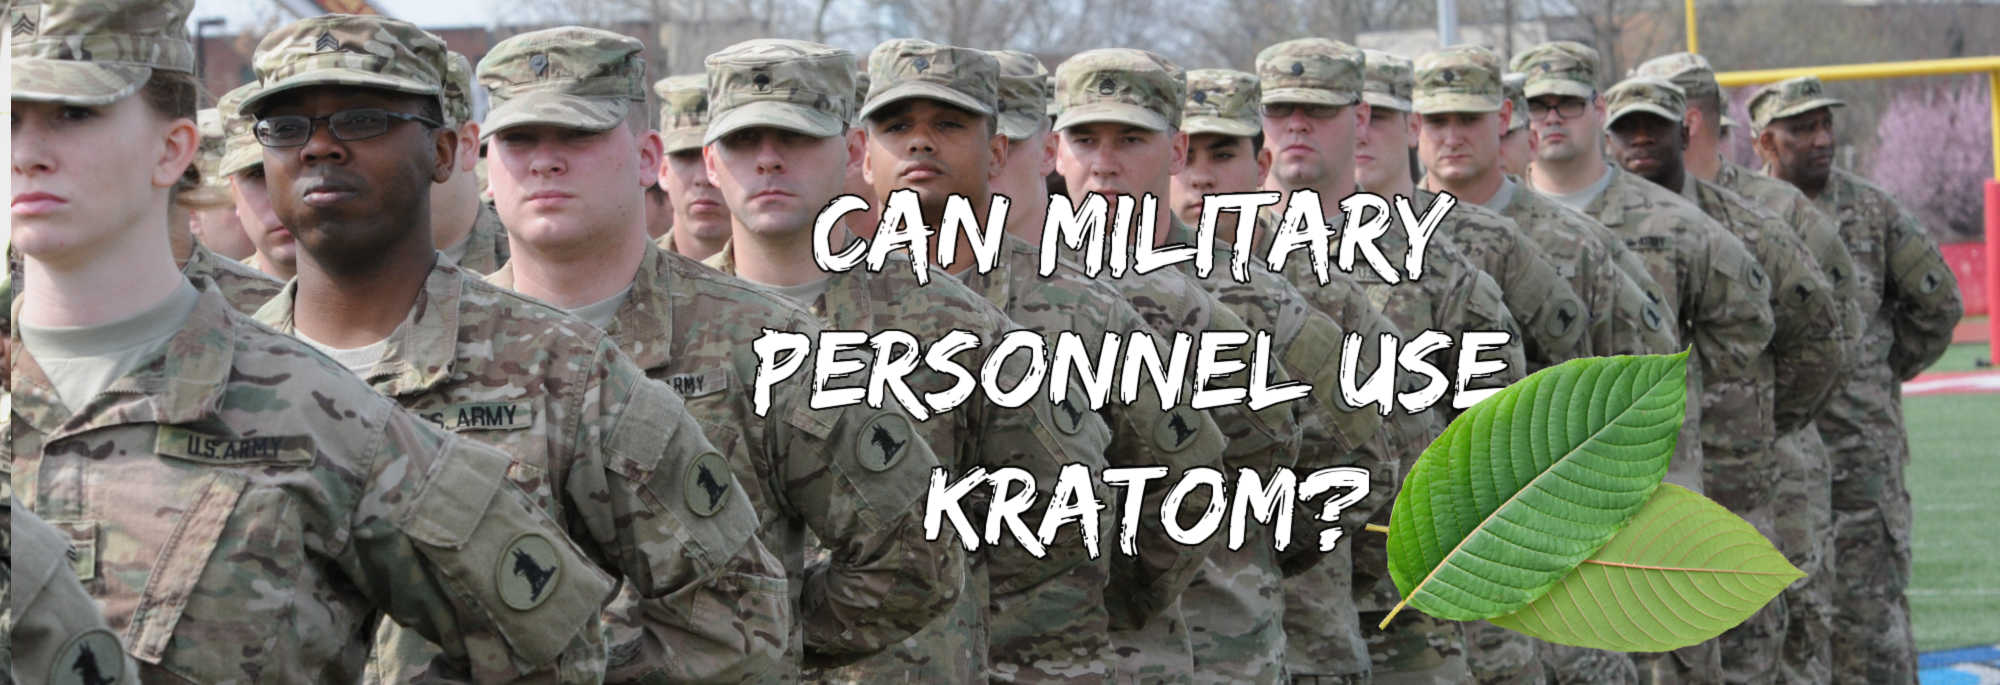 image of can military personnel use kratom